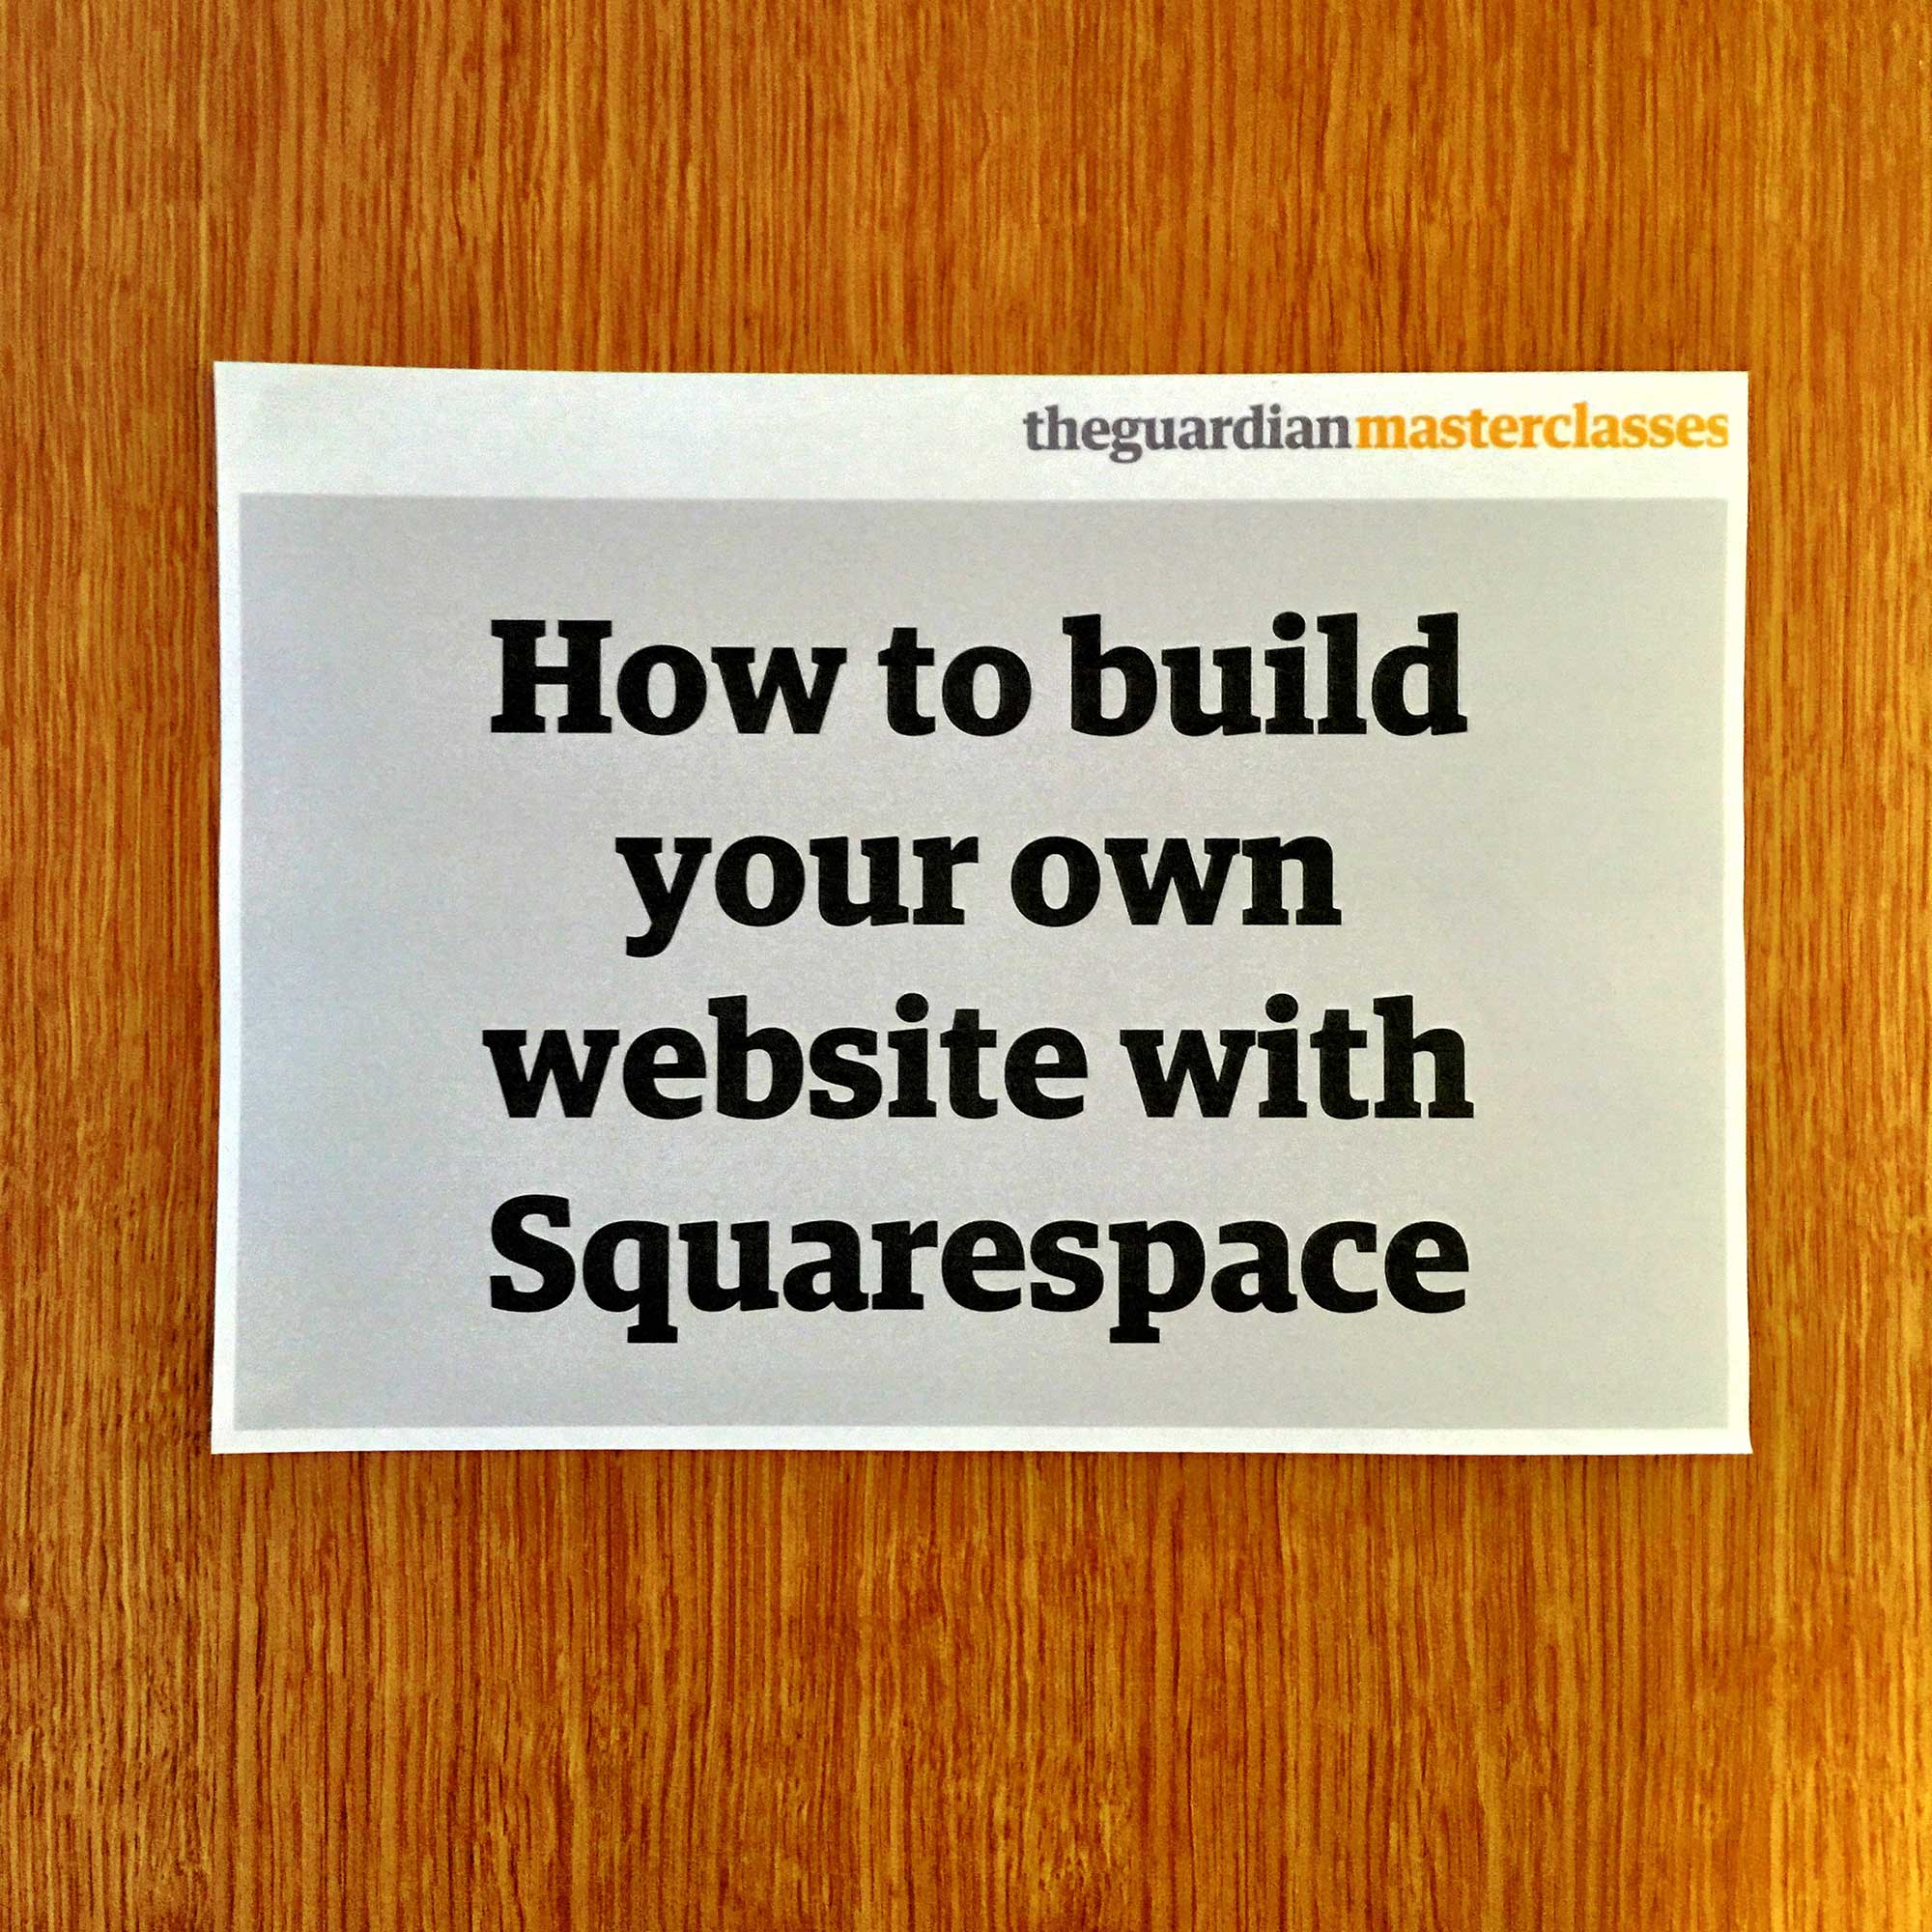 Guardian Masterclasses and Squarespace